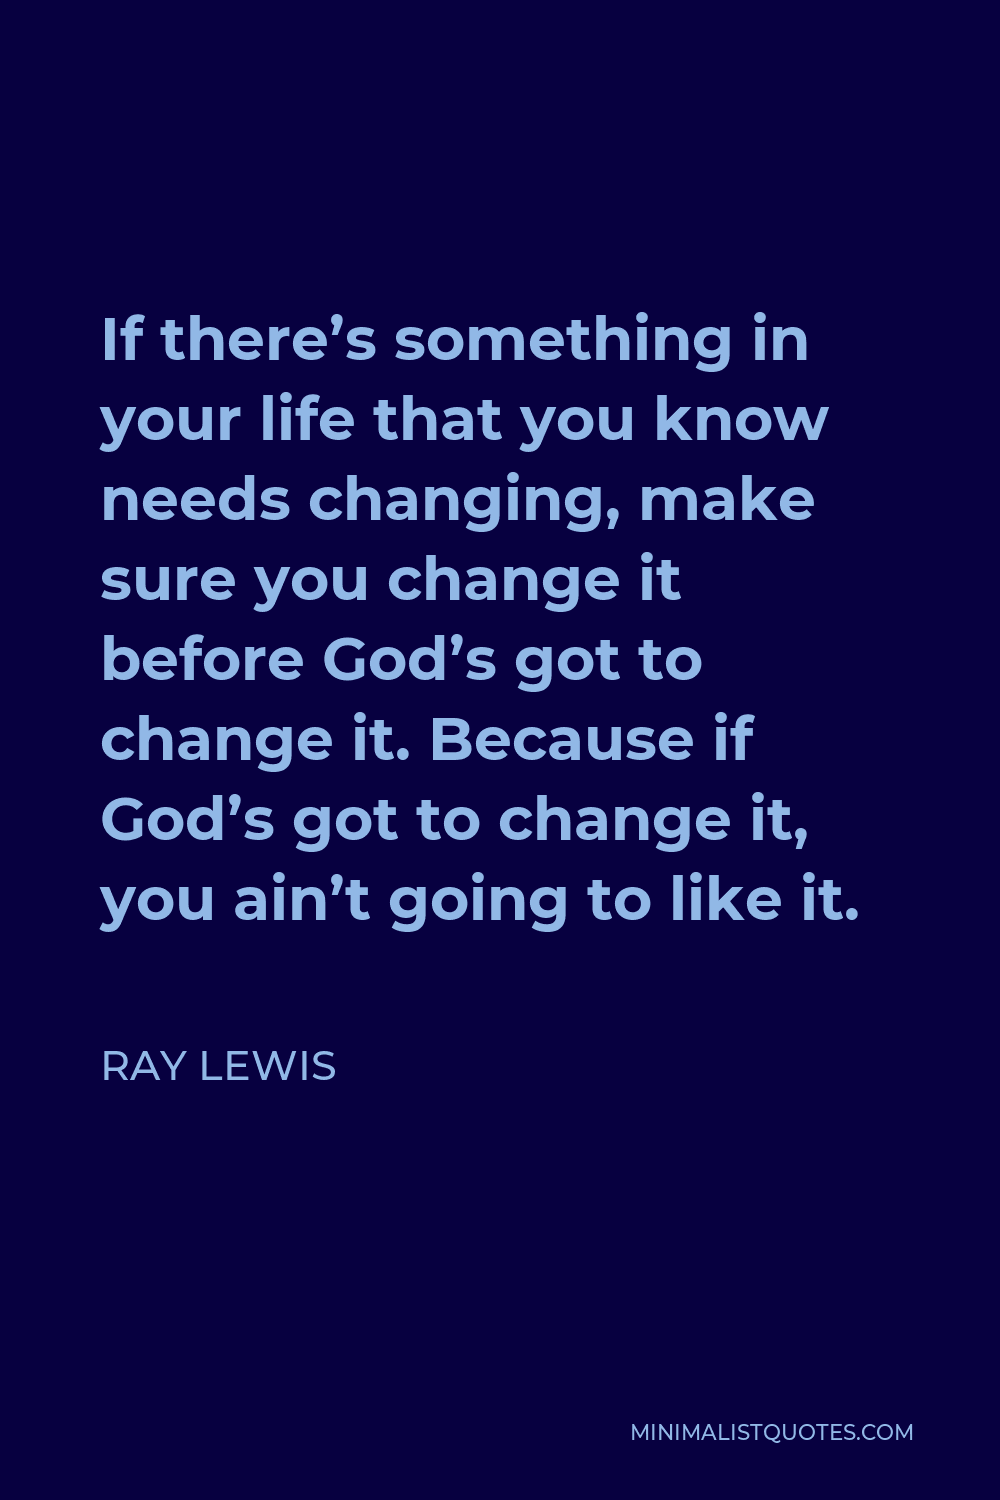 Ray Lewis Quote - If there’s something in your life that you know needs changing, make sure you change it before God’s got to change it. Because if God’s got to change it, you ain’t going to like it.